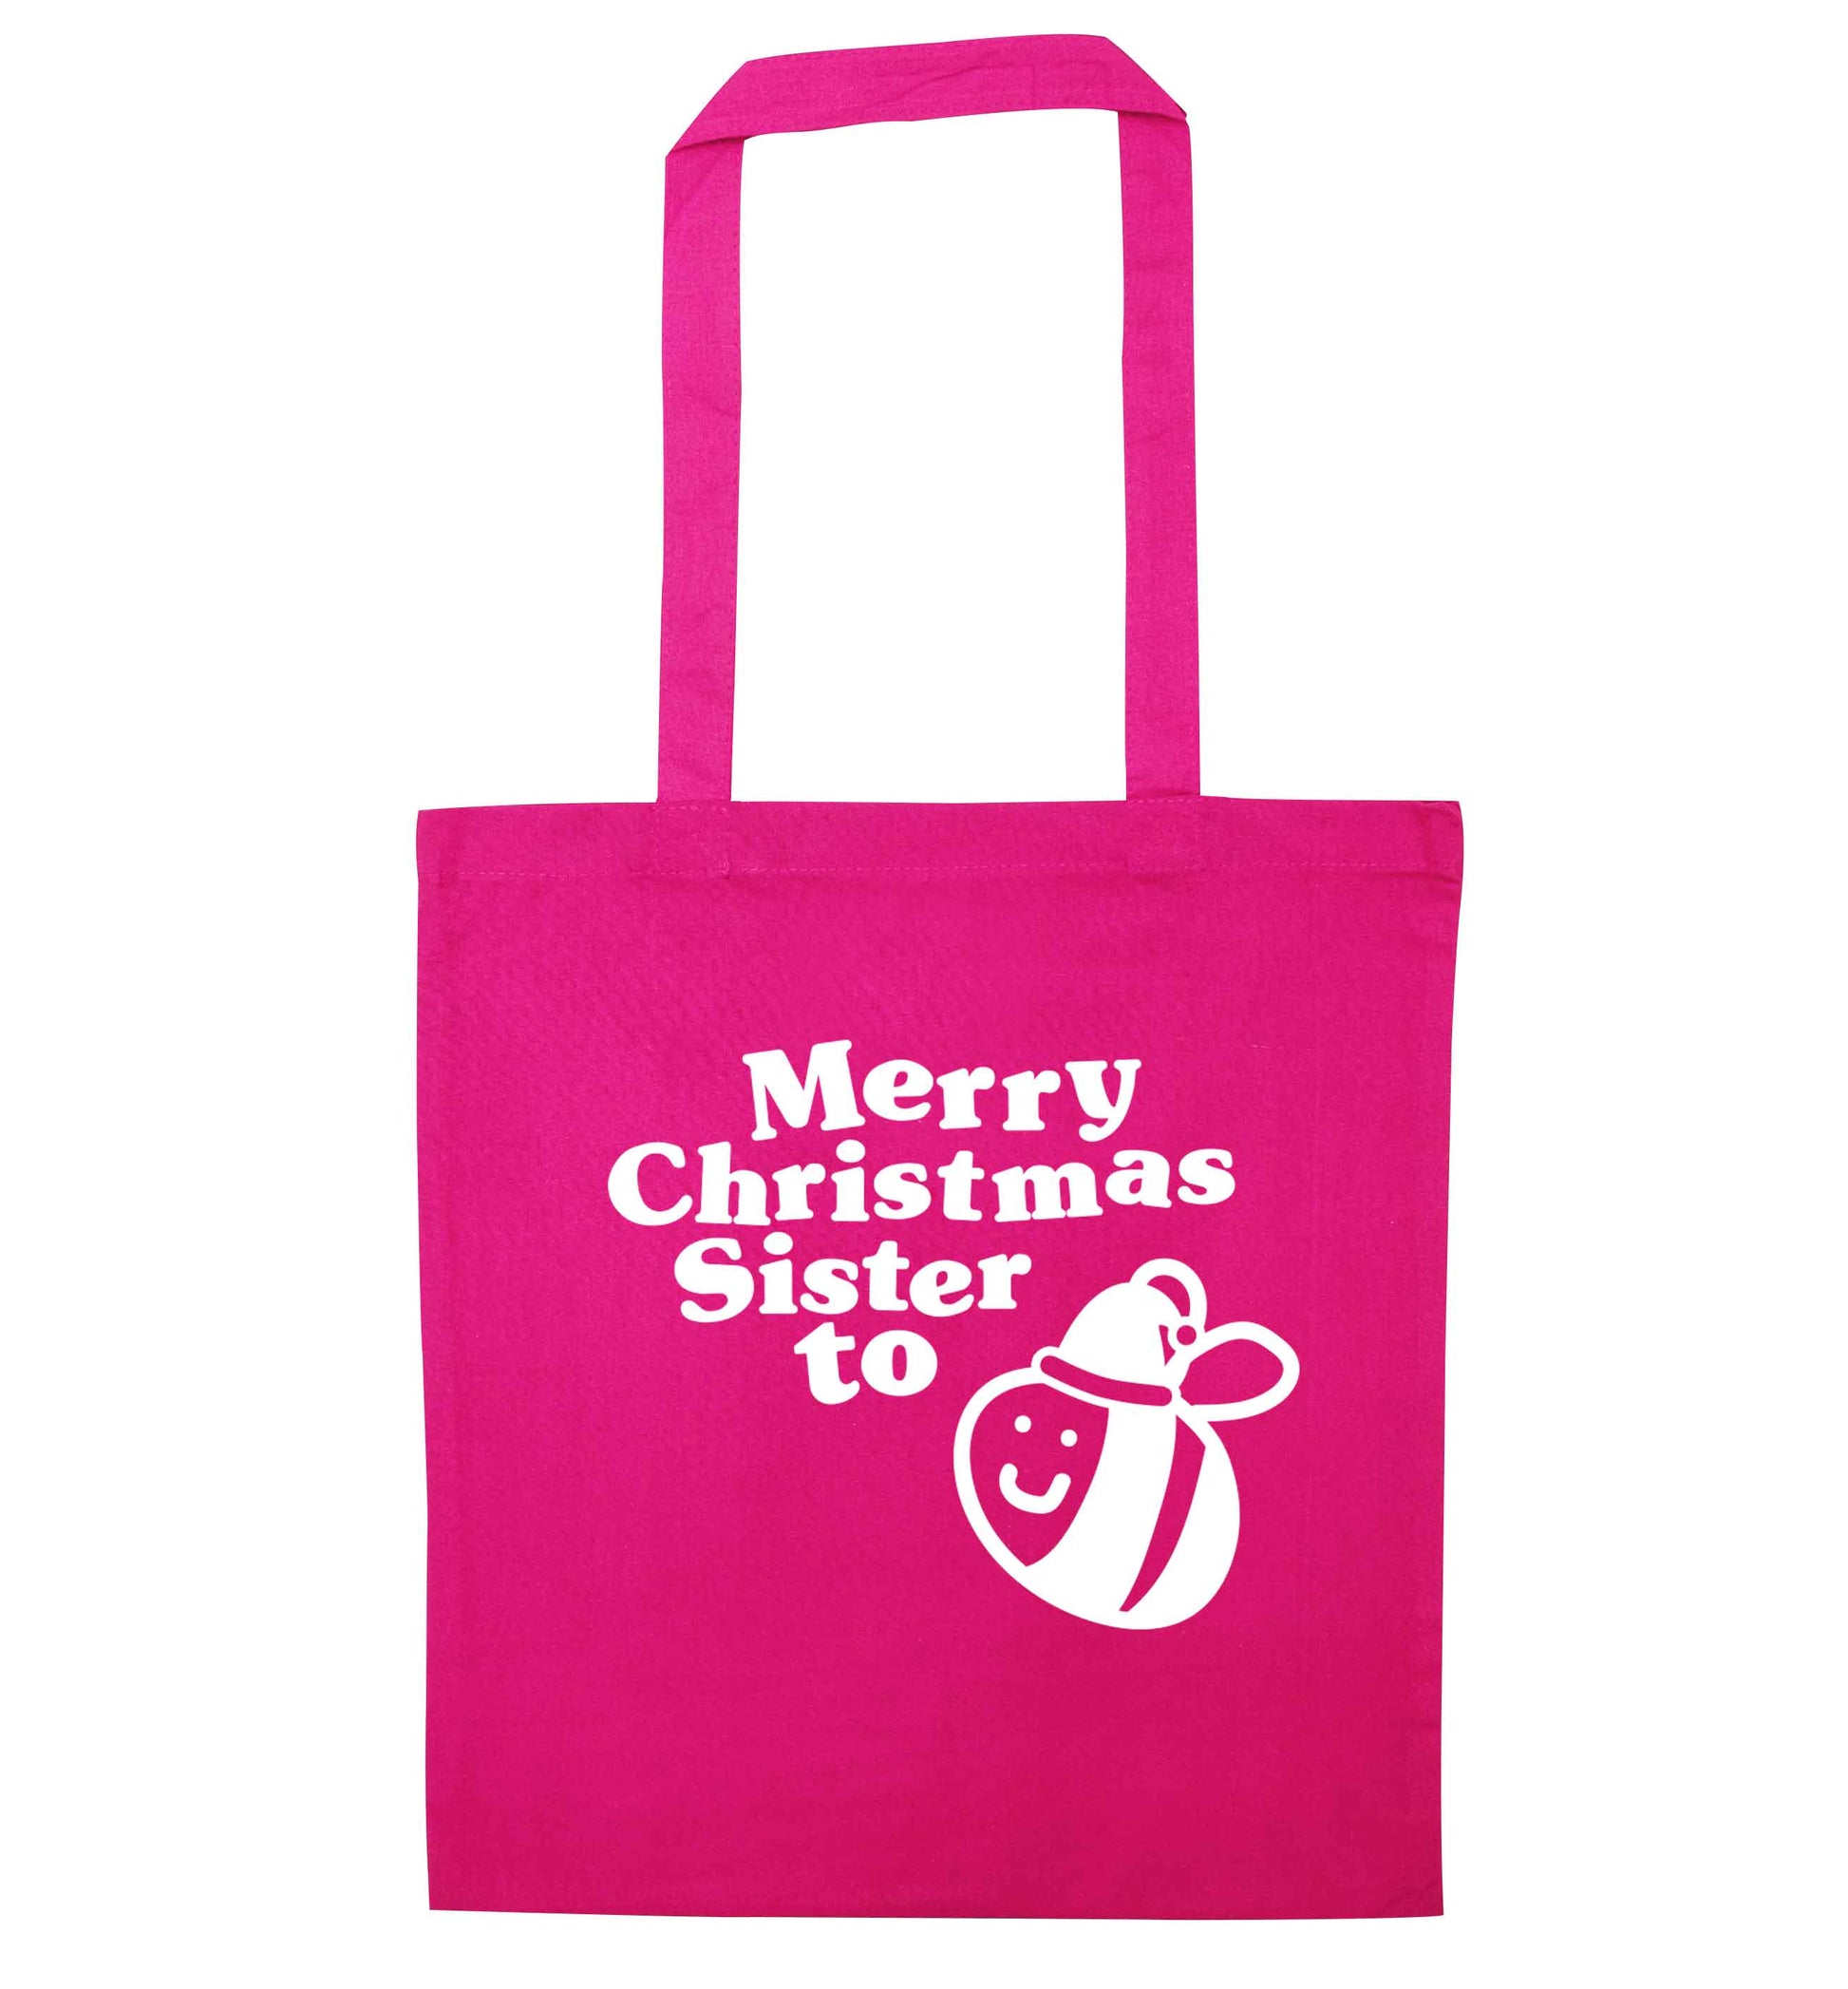 Merry Christmas sister to be pink tote bag